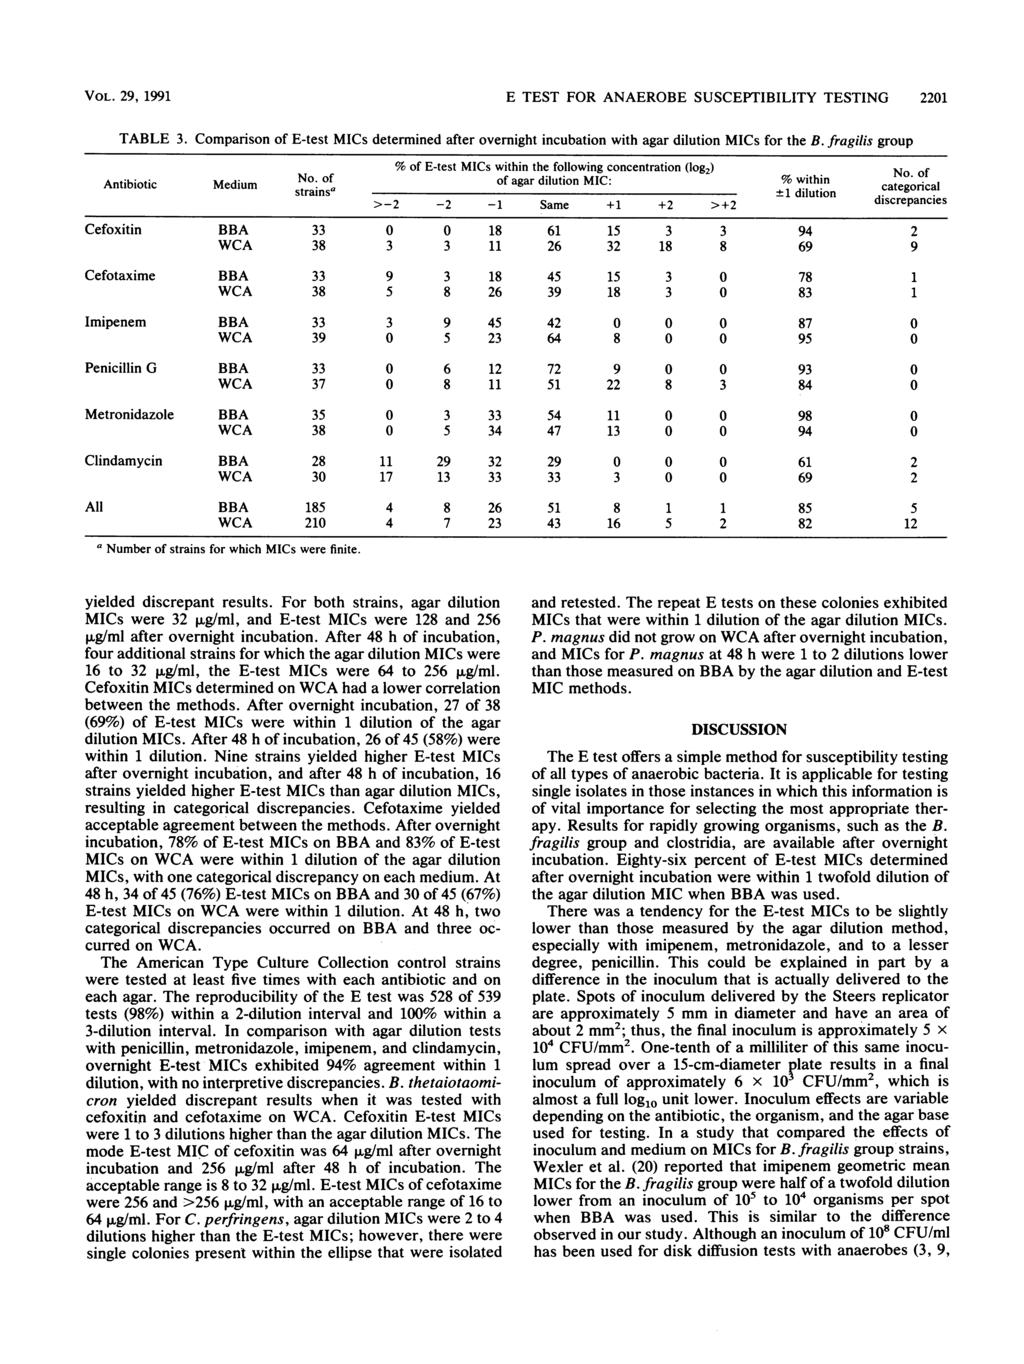 VOL. 29, 1991 E TEST FOR ANAEROBE SUSCEPTIBILITY TESTING 2201 TABLE 3. Comparison of E-test MICs determined after overnight incubation with agar dilution MICs for the B.